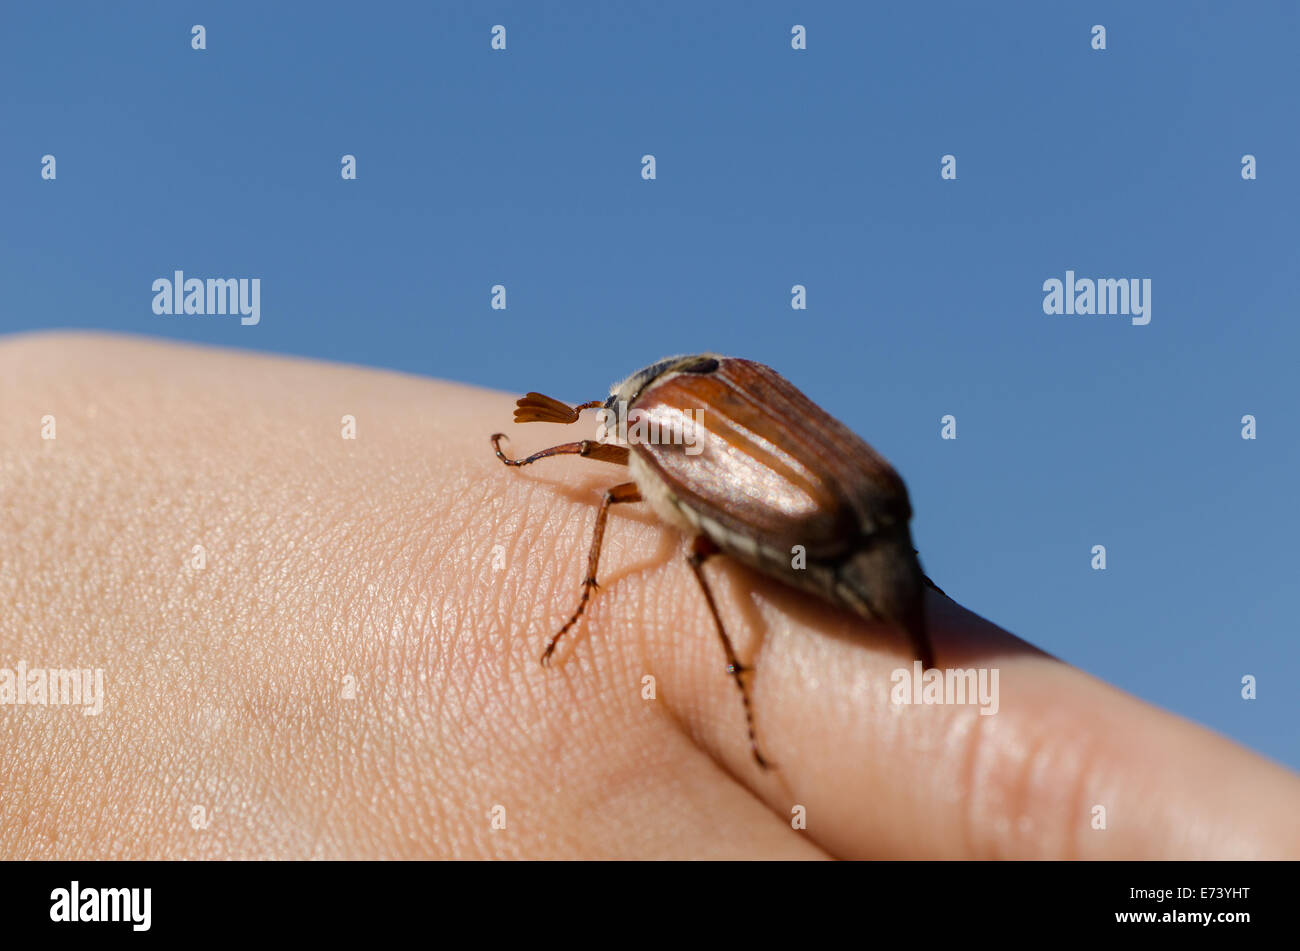 woman palms and fingers crawling big brown cockchafer chafer beetle crawls fingers up spread wings and flies on blue sky backgro Stock Photo